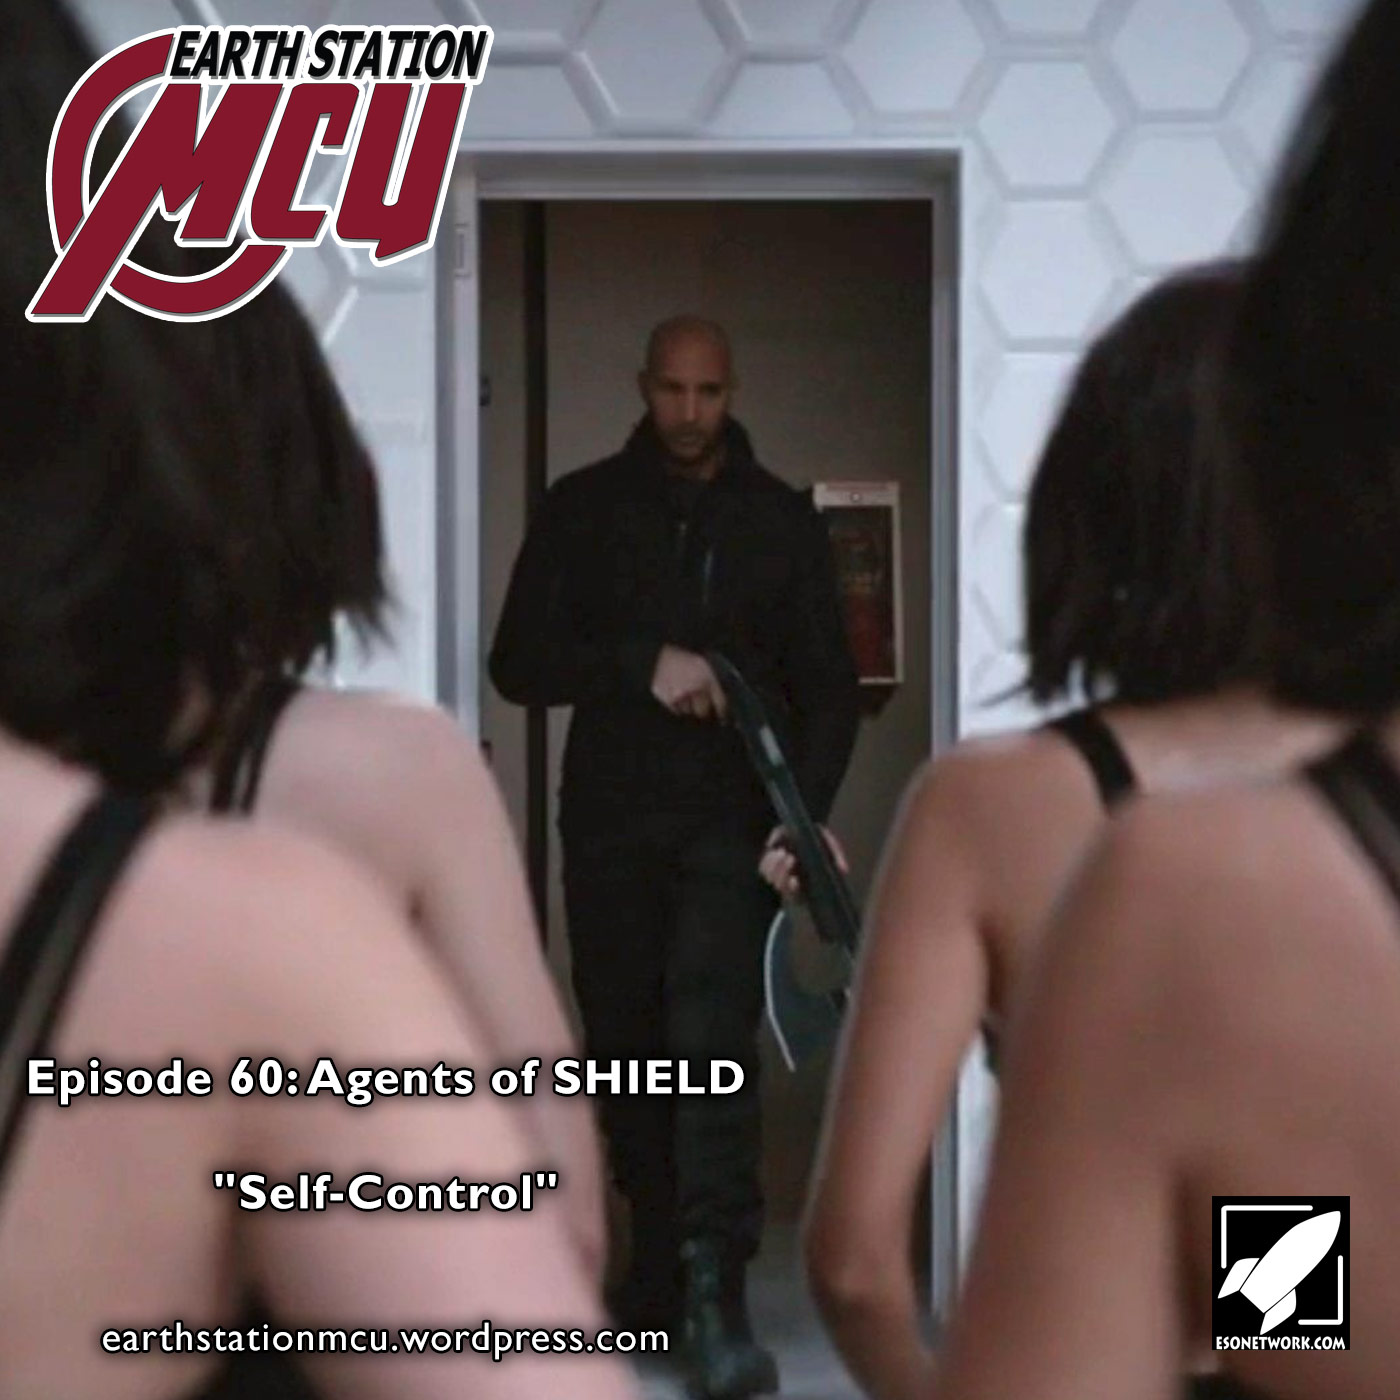 Earth Station MCU Episode 60: Agents of SHIELD 